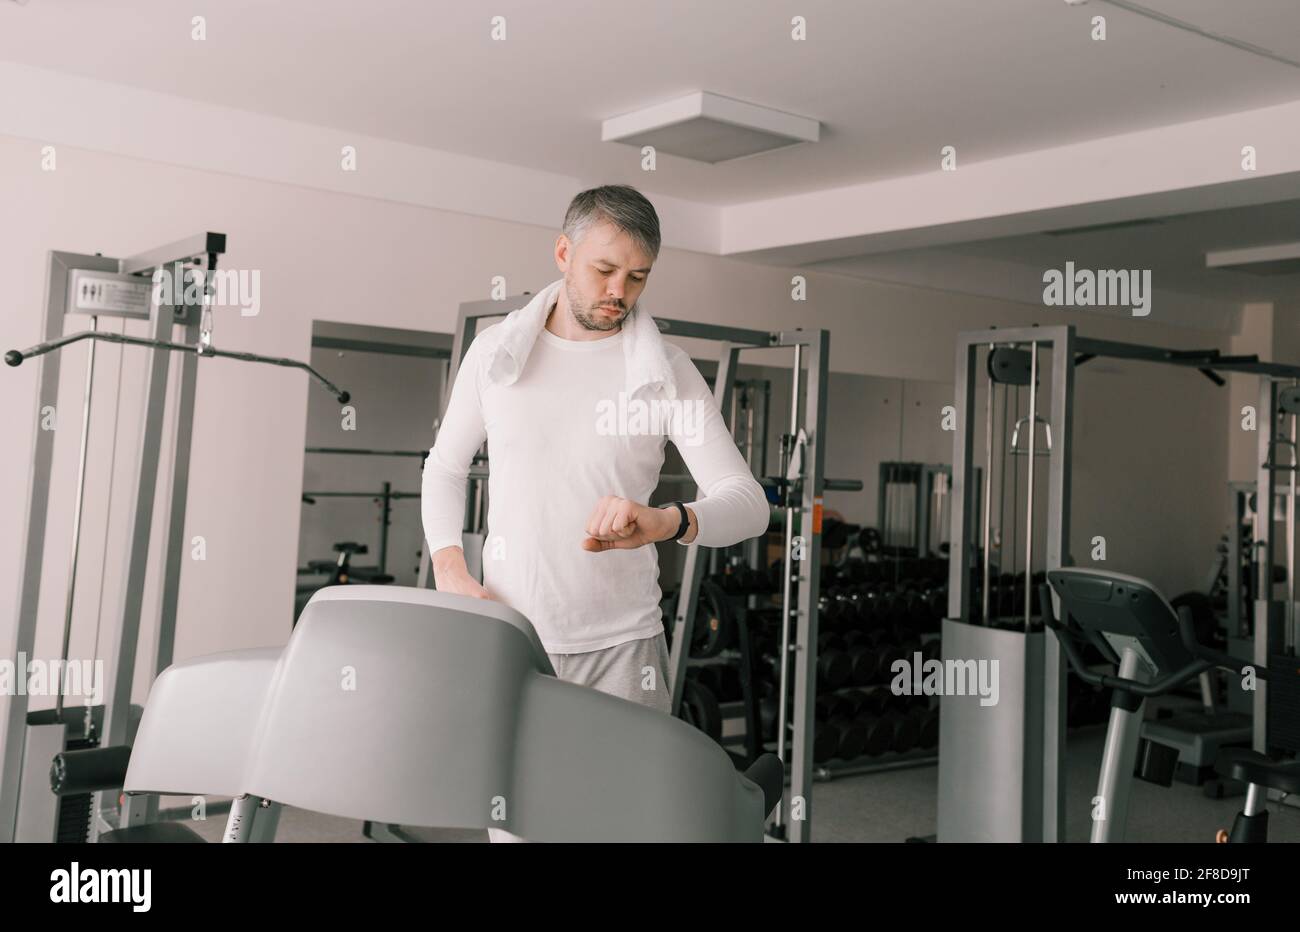 a man stands on a treadmill and carefully looks at the clock after a cardio workout. Taking care of your body. Stock Photo